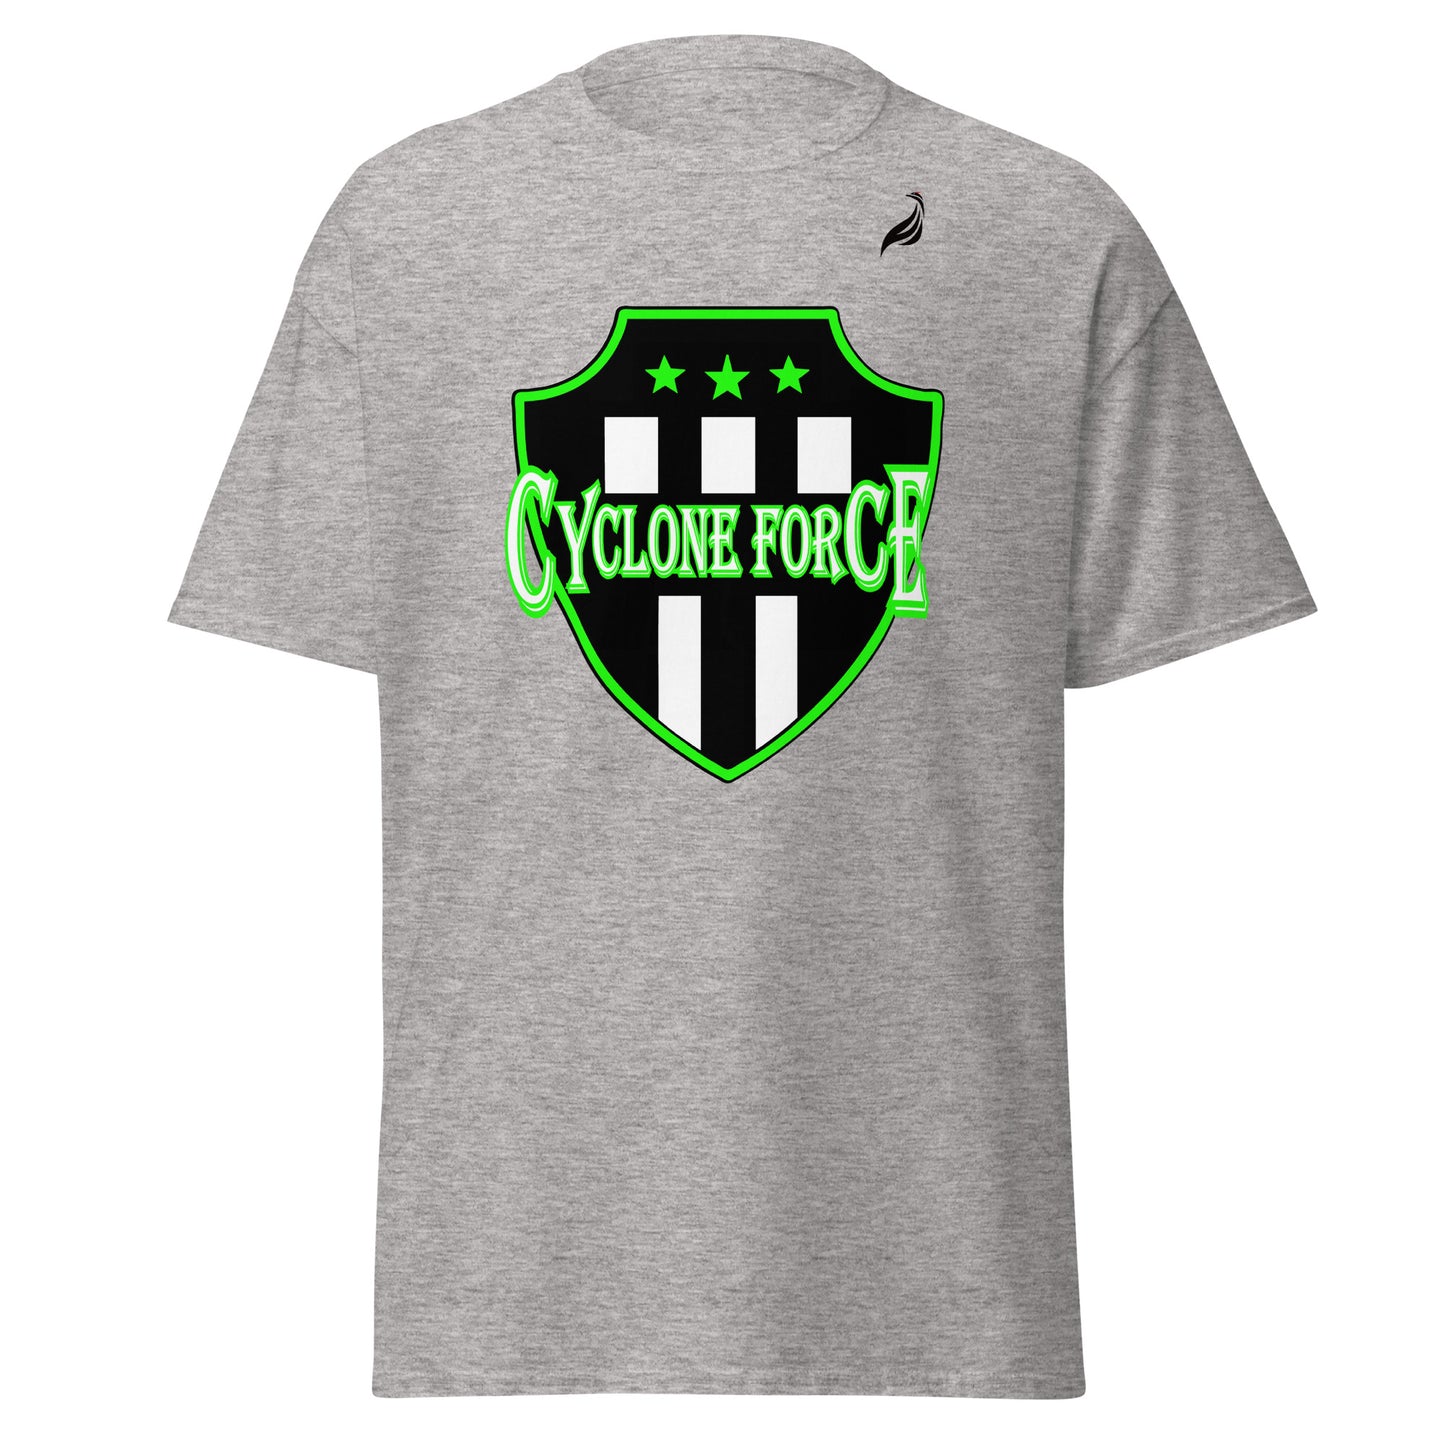 Cyclone Force Parent Tee ORR